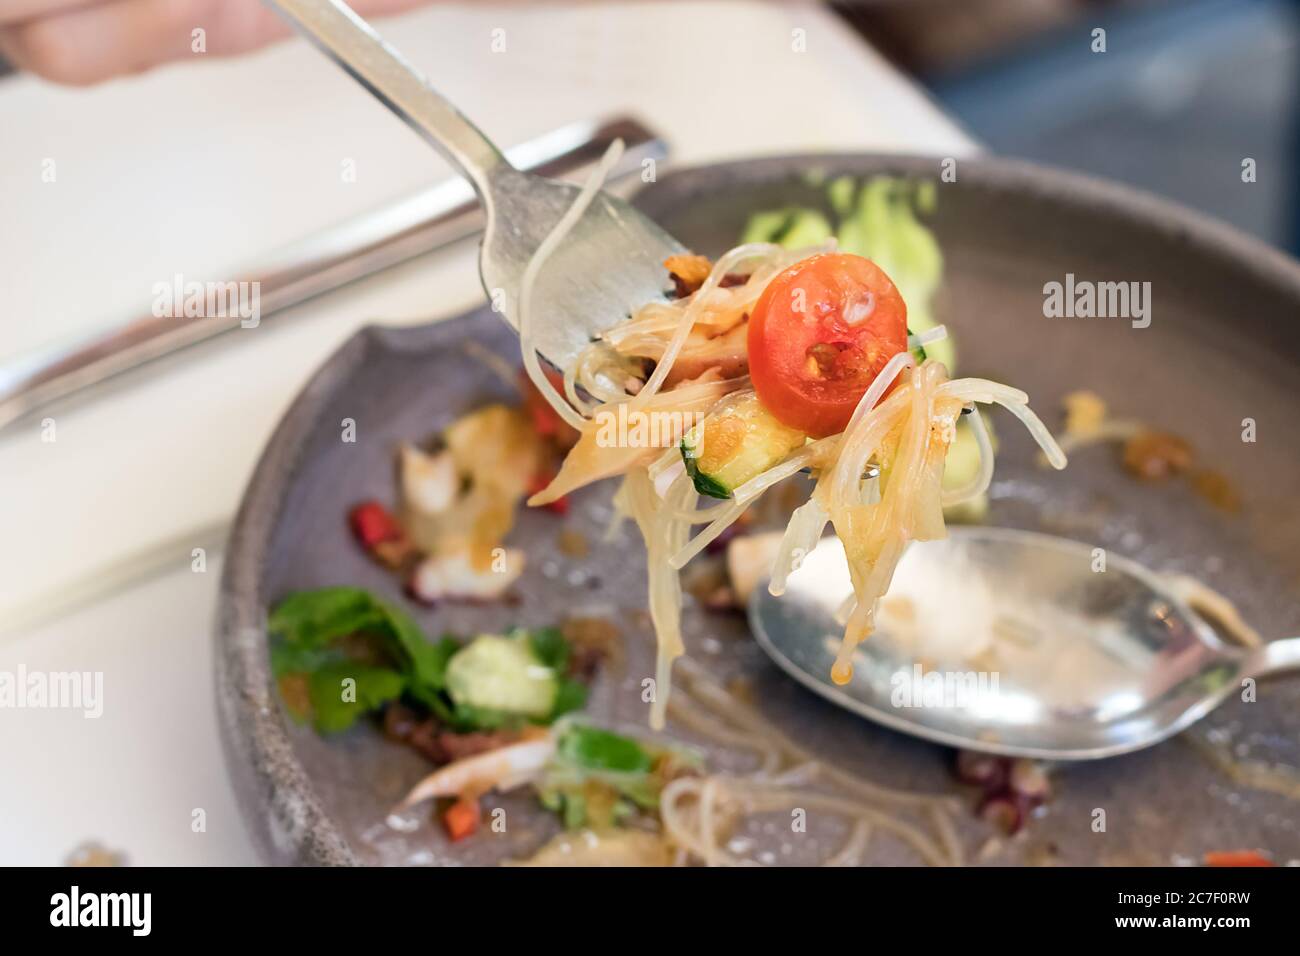 Human hand holding a fork with food over a plate Stock Photo